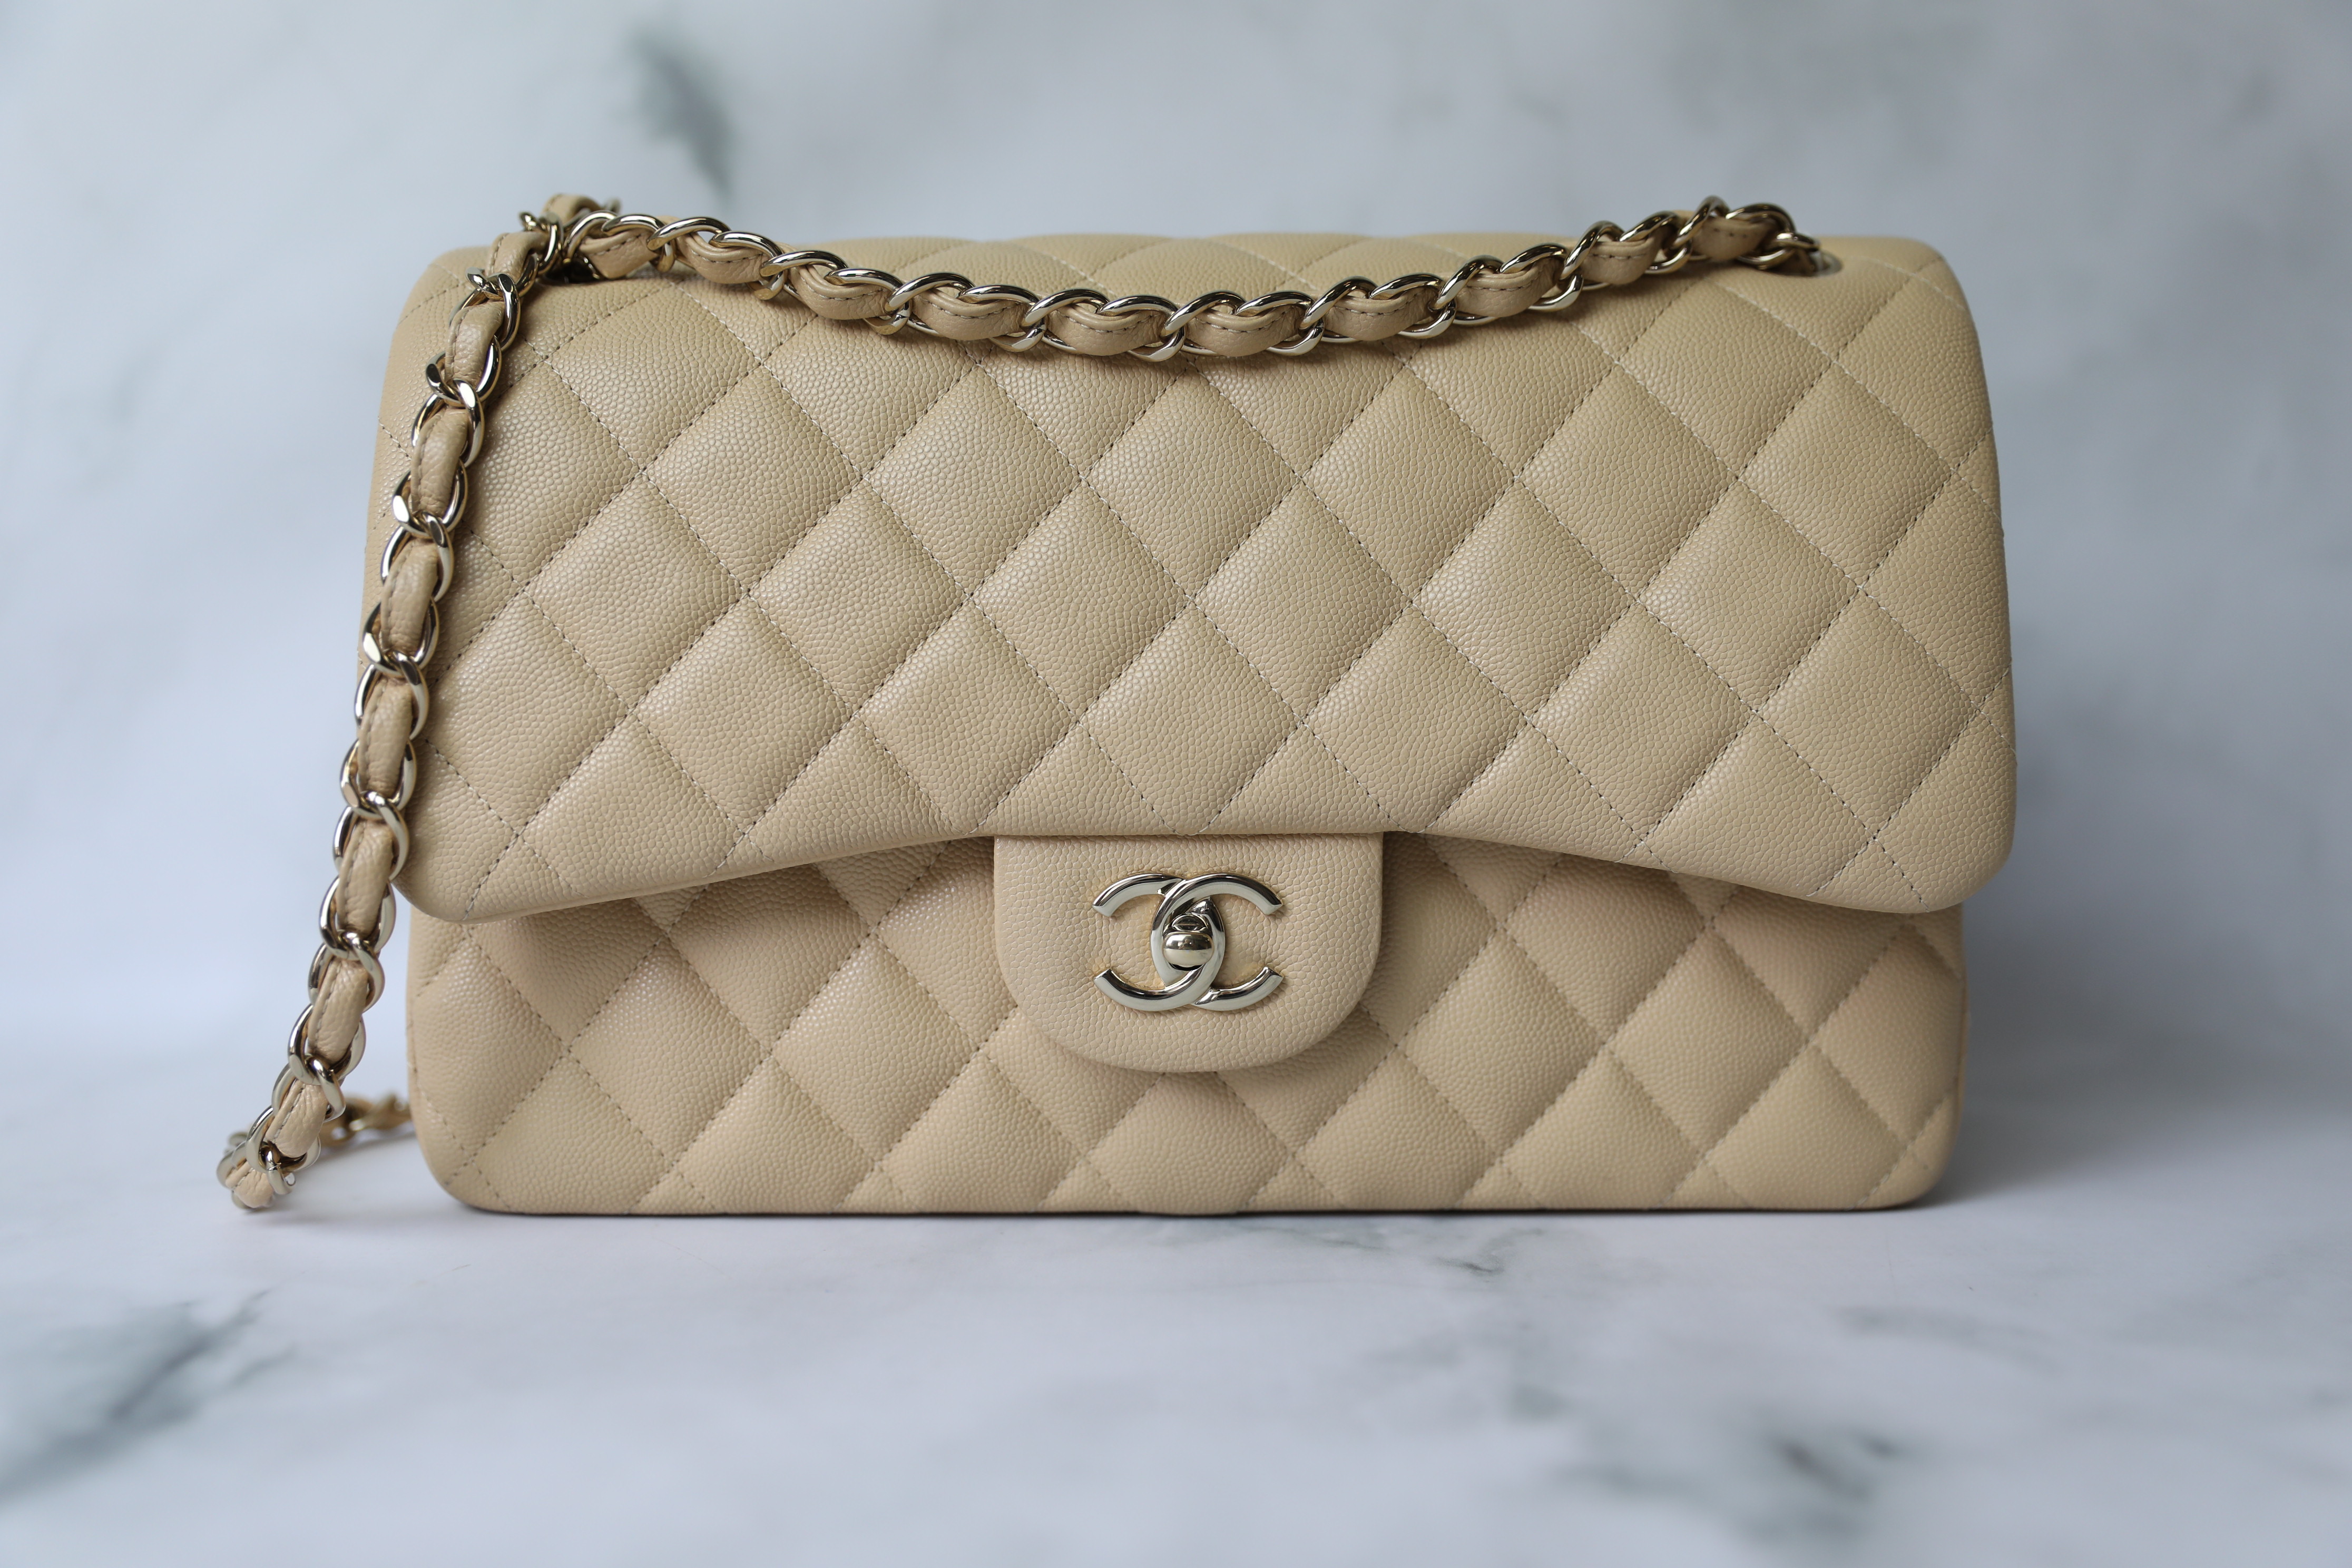 Chanel Classic Jumbo, Beige Caviar with Gold Hardware, Preowned in